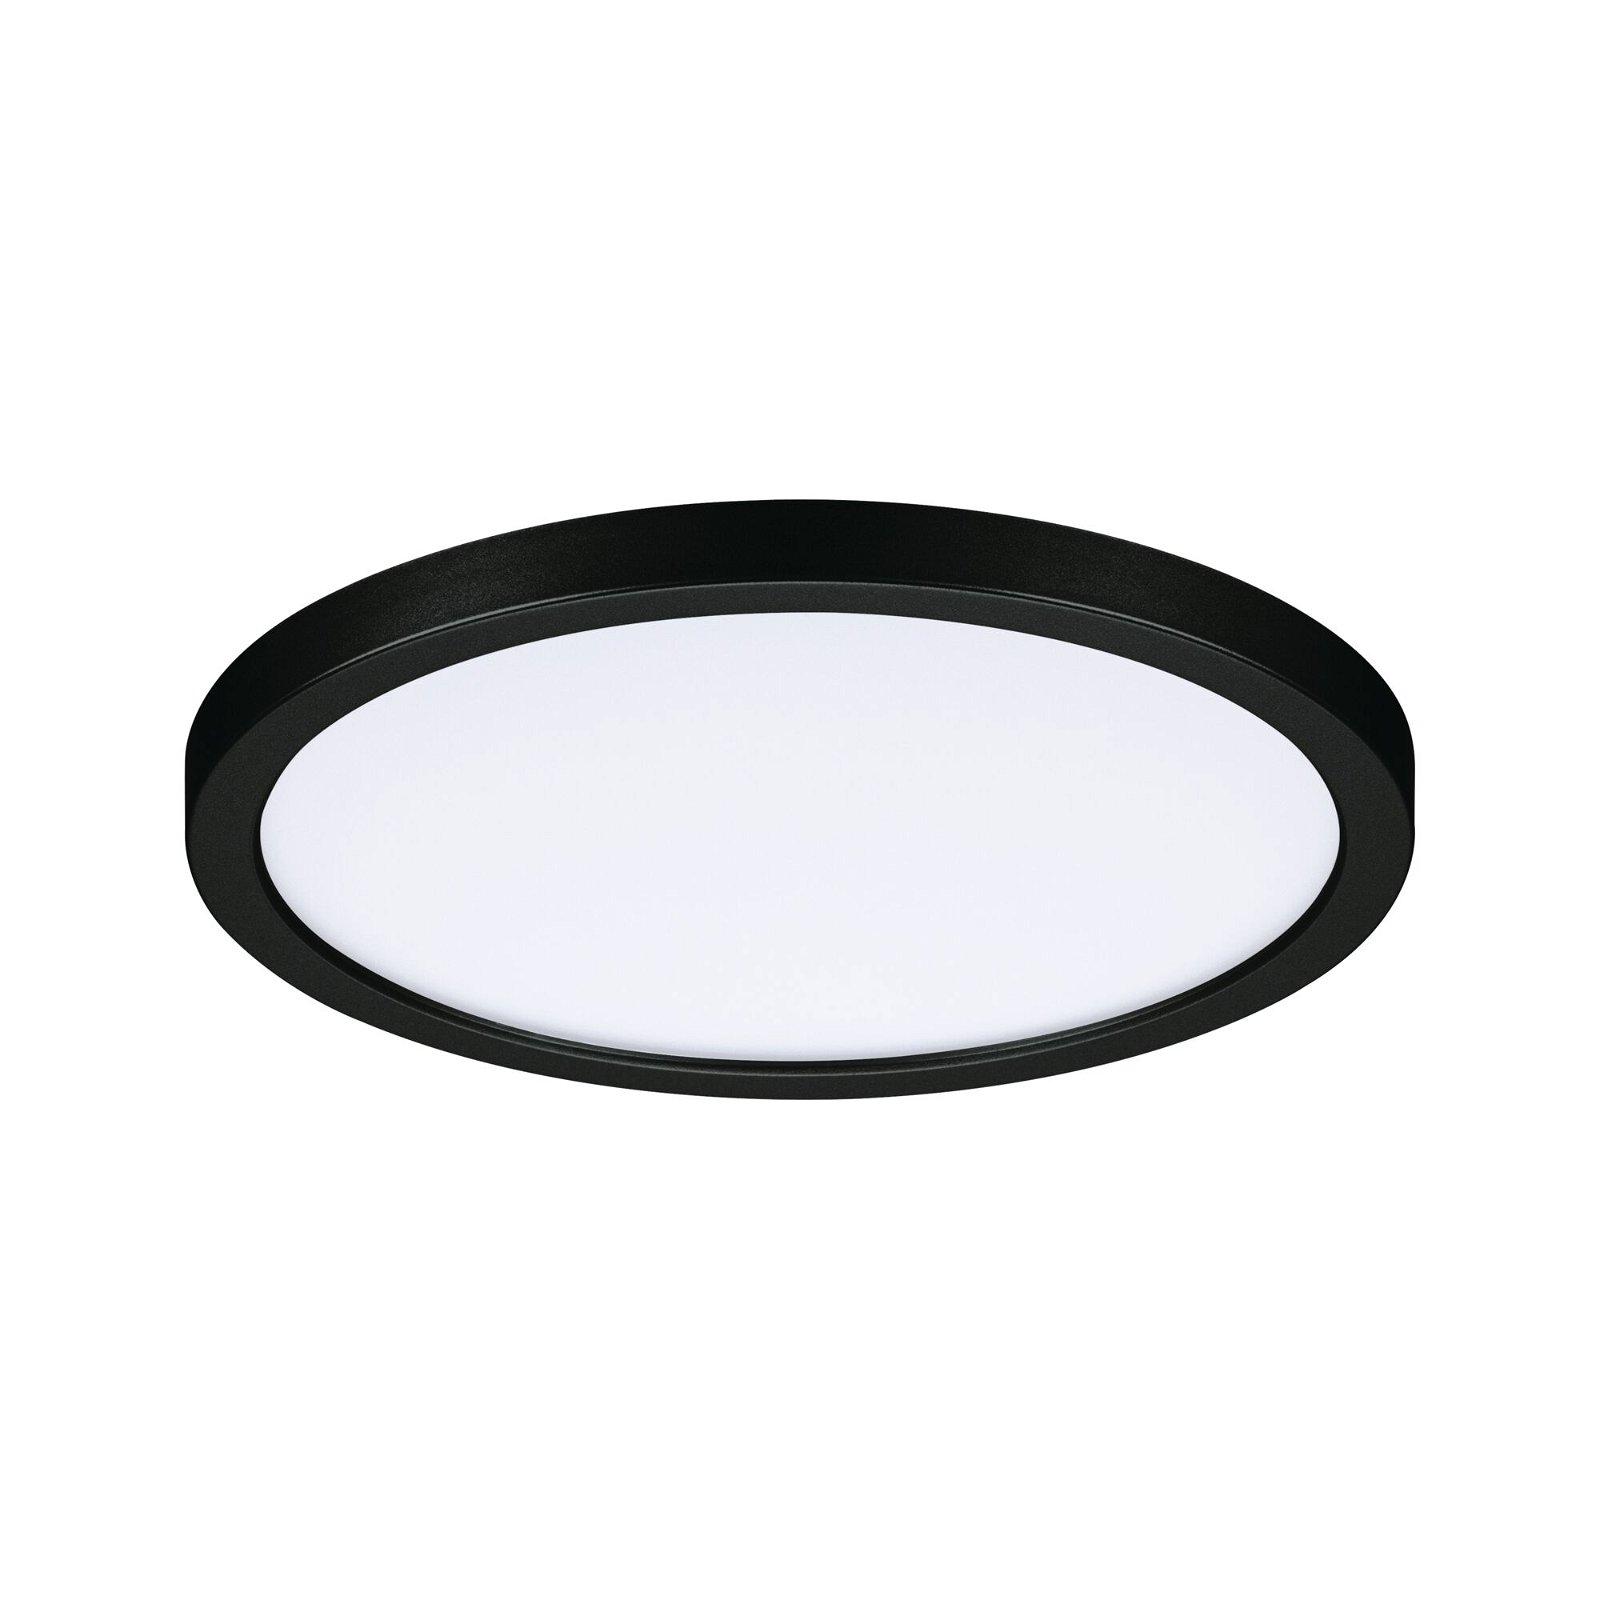 VariFit LED Recessed panel Dim to Warm Areo IP44 round 175mm 13W 1200lm 3 Step Dim to warm Black dimmable